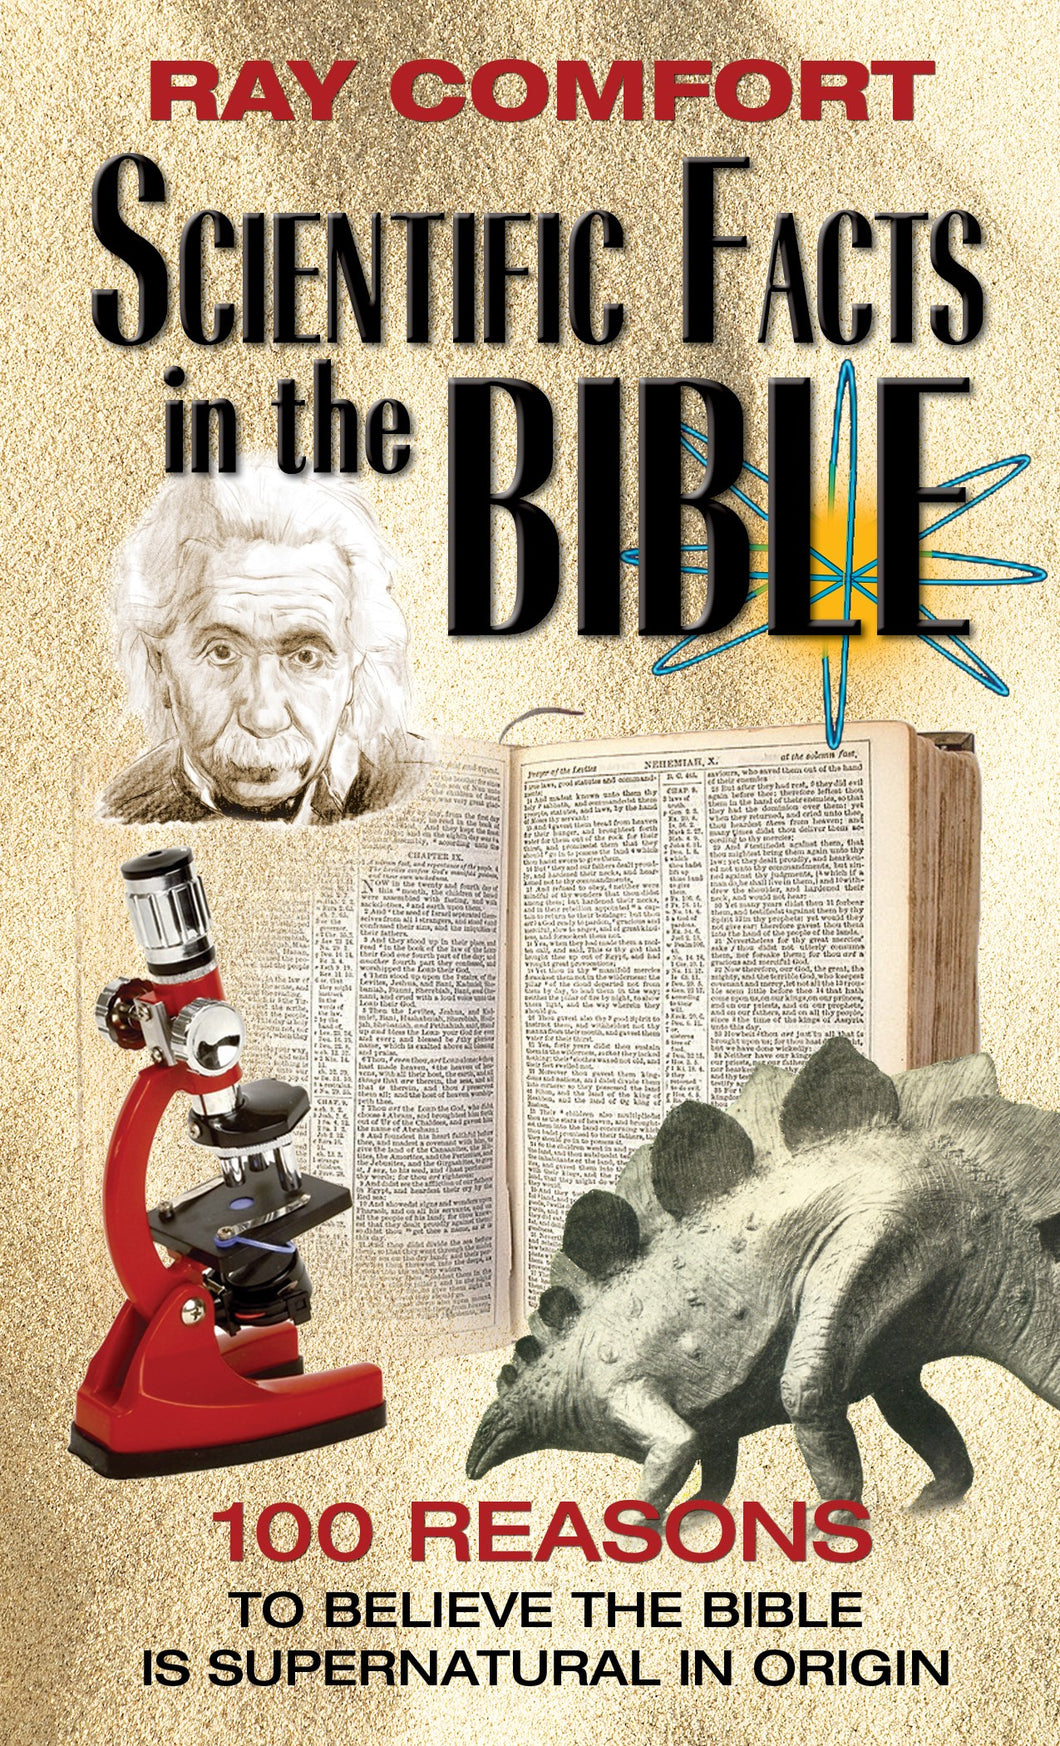 SCIENTIFIC FACTS IN THE BIBLE